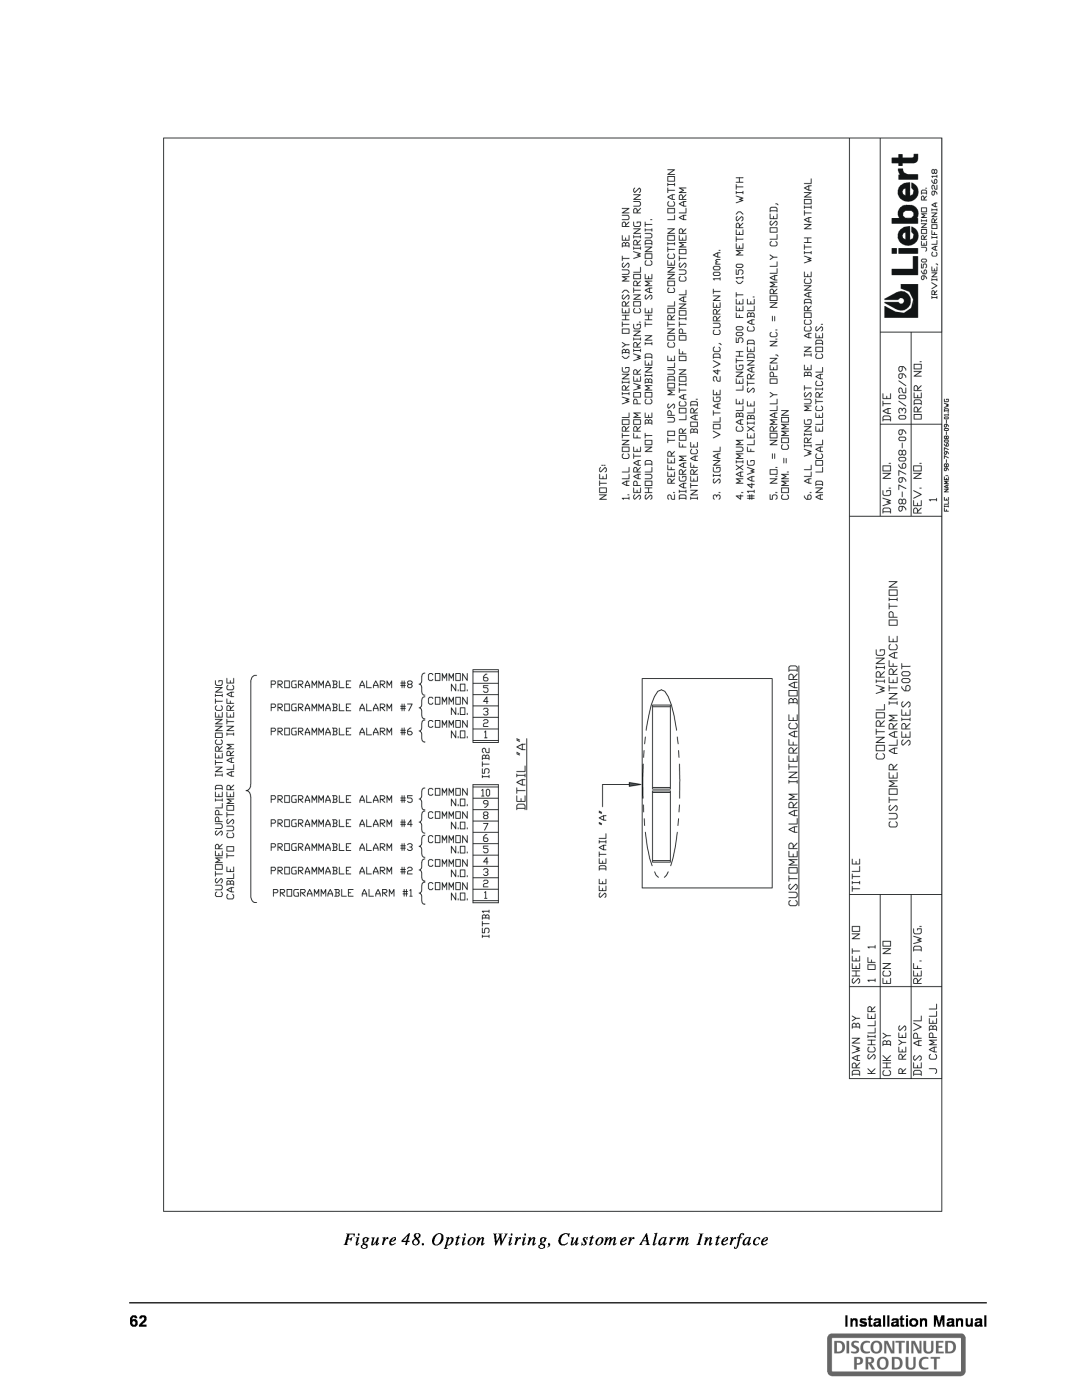 Emerson SERIES 600T manual Option Wiring, Customer Alarm Interface, Discontinued Product 